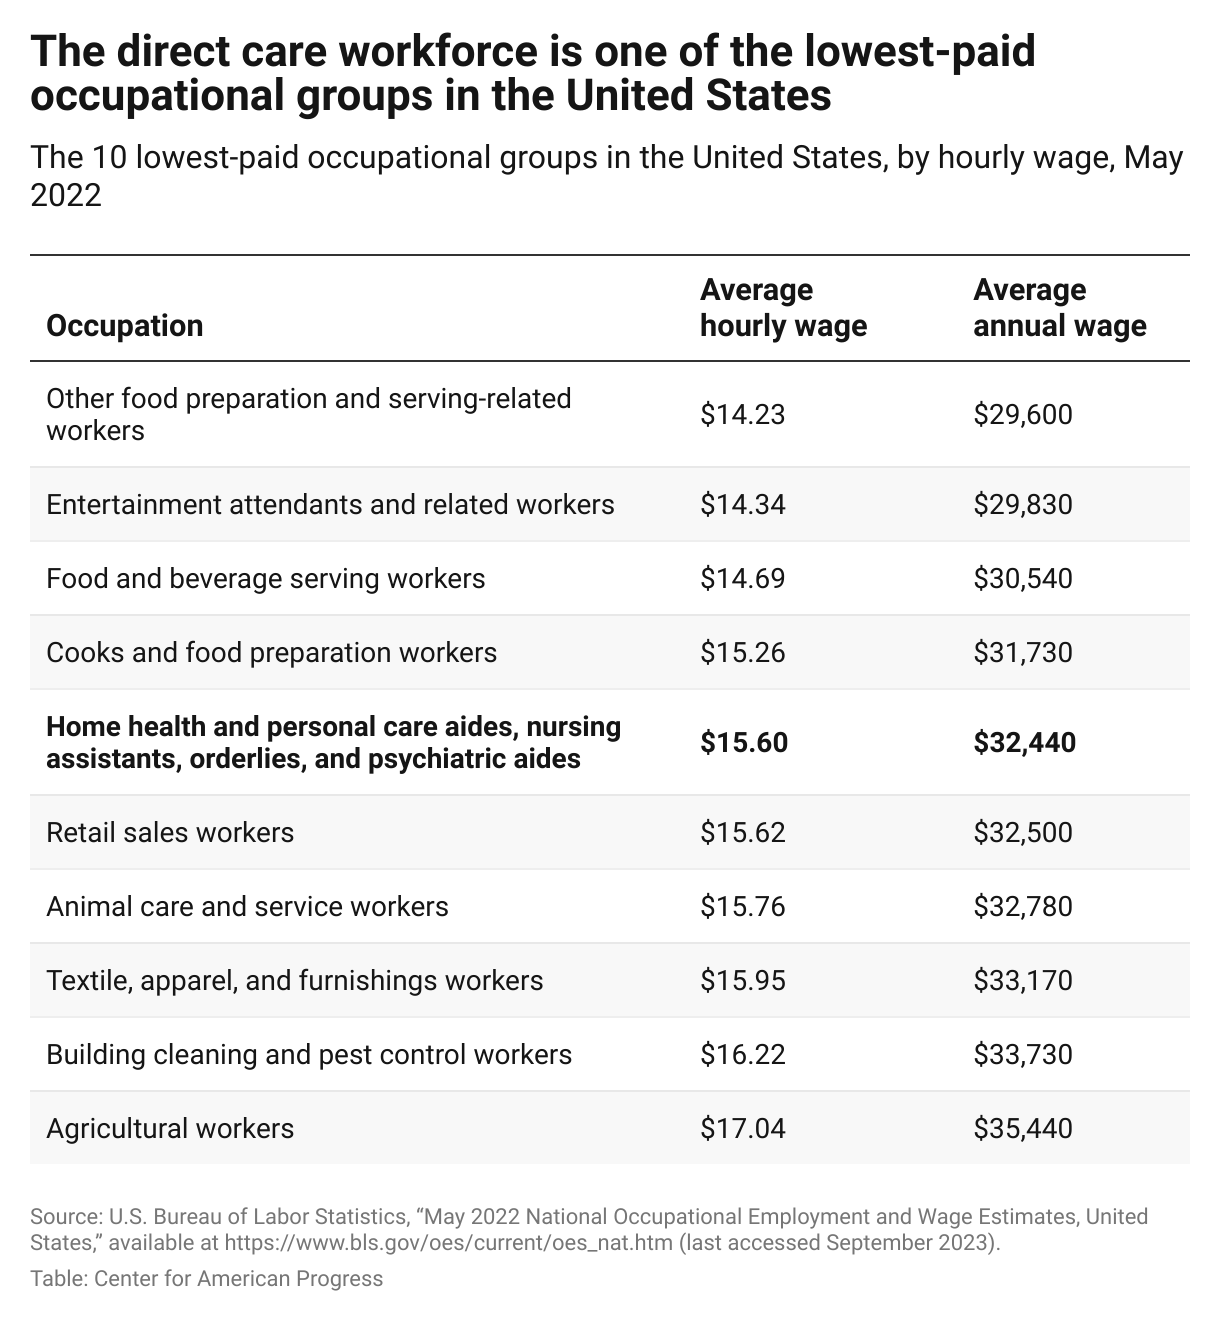 Table showing that together, home health and personal care aides, nursing assistants, orderlies, and psychiatric aides were the fifth-lowest-paid occupational group in the United States as of May 2022.